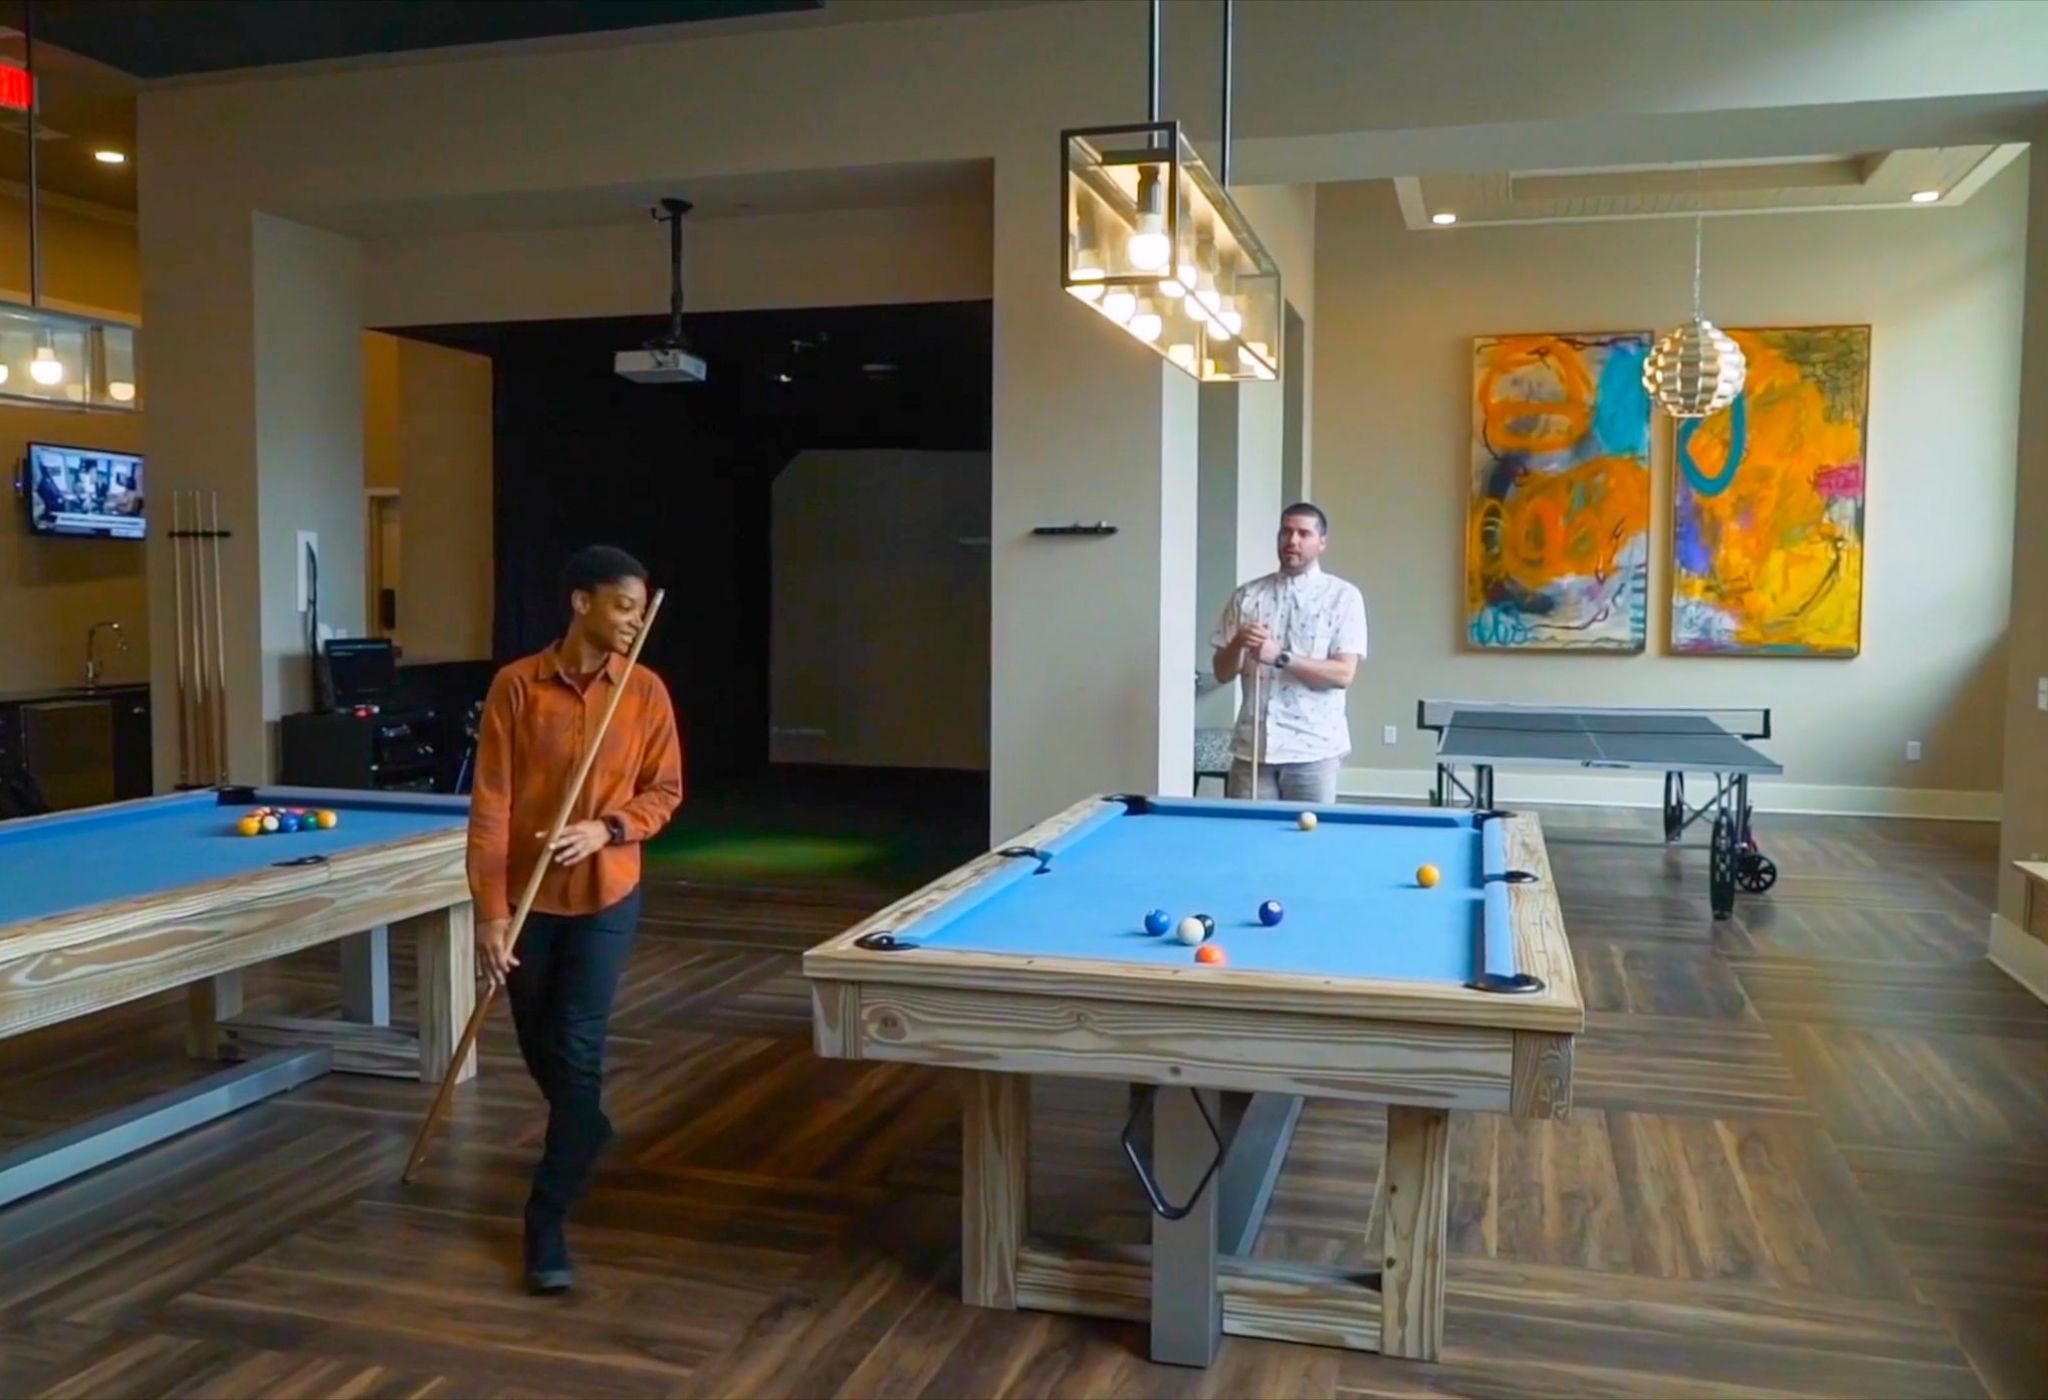 Fully furnished game room with billiards and TVs